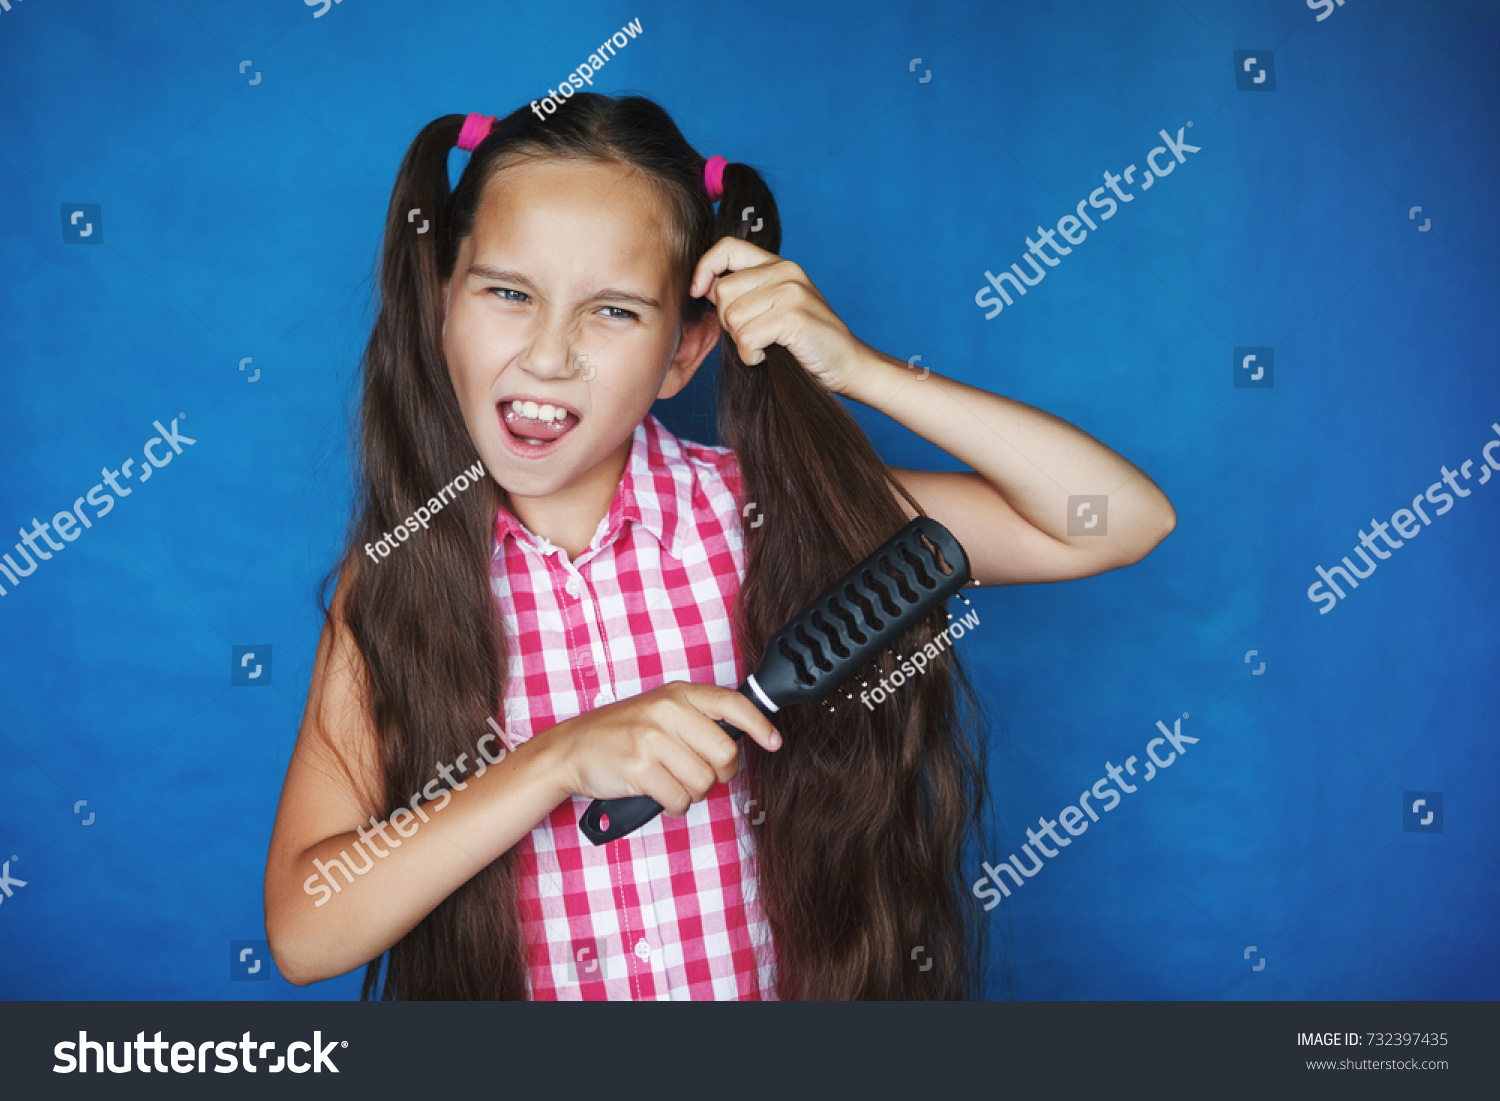 Little girl on a blue background combing her long hair #732397435